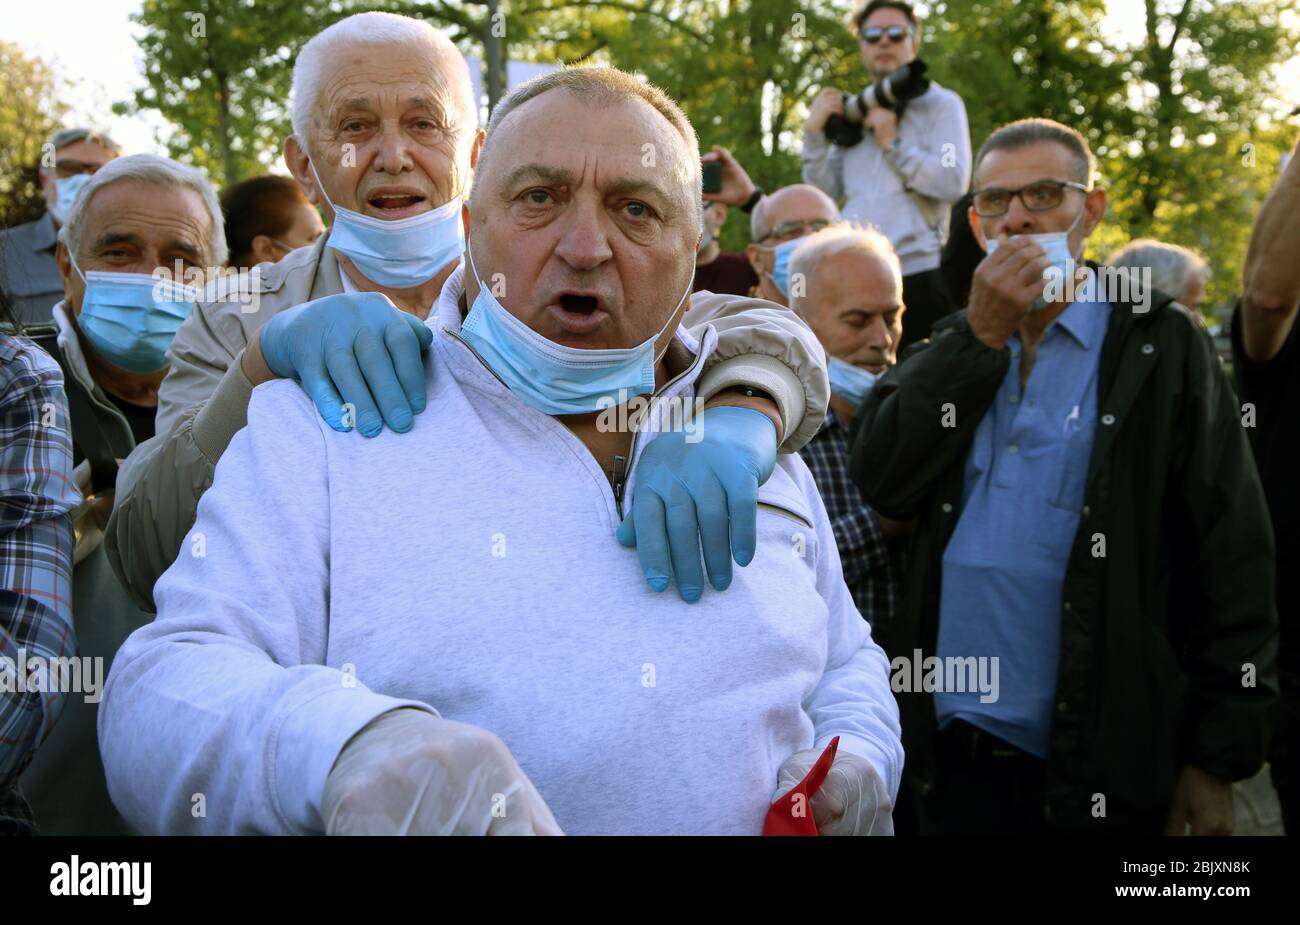 Belgrade, Serbia. 30th Apr 2020. Serbian opposition members wearing protective face masks attend the protest in front of the House of Parliament, amid the ongoing coronavirus COVID-19 pandemic. Serbian opposition and members of Alliance for Serbia protested in front of the parliament building against government policies to stem the spread of the pandemic COVID-19 disease caused by the SARS-CoV-2 coronavirus. Credit: Koca Sulejmanovic/Alamy Live News Stock Photo